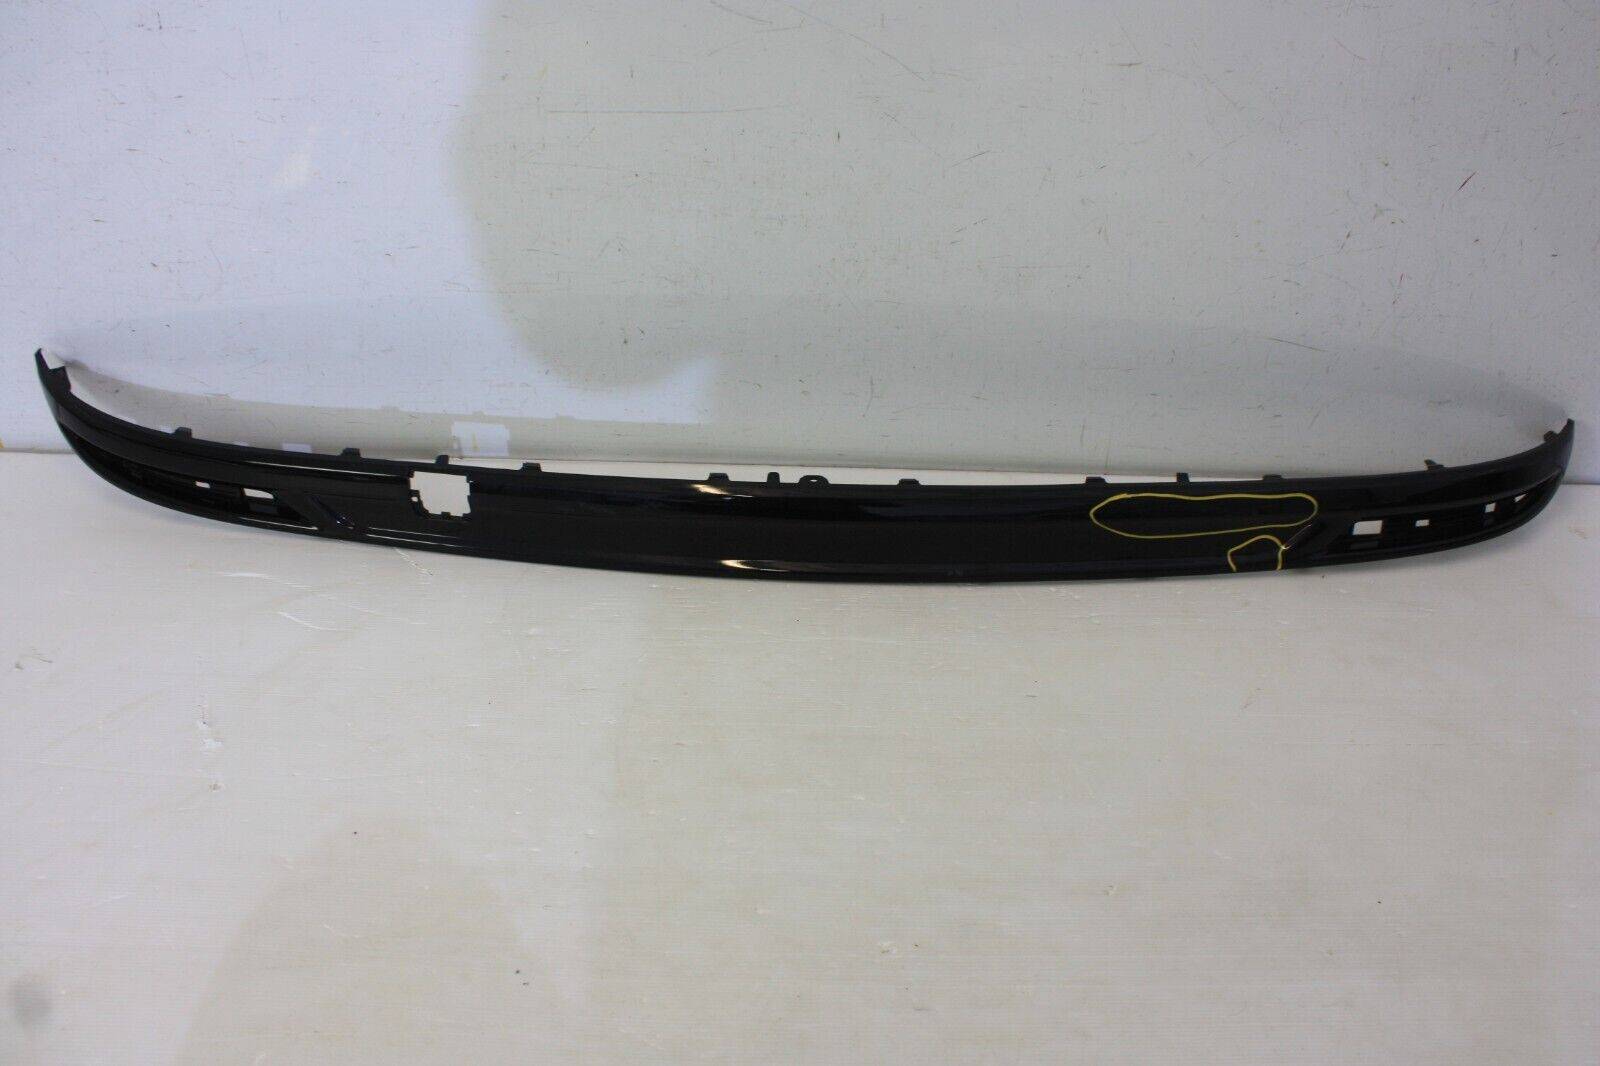 Ford Mondeo Rear Bumper Center Pad 2015 TO 2019 DS73 17K922 MAW Genuine 175524988357